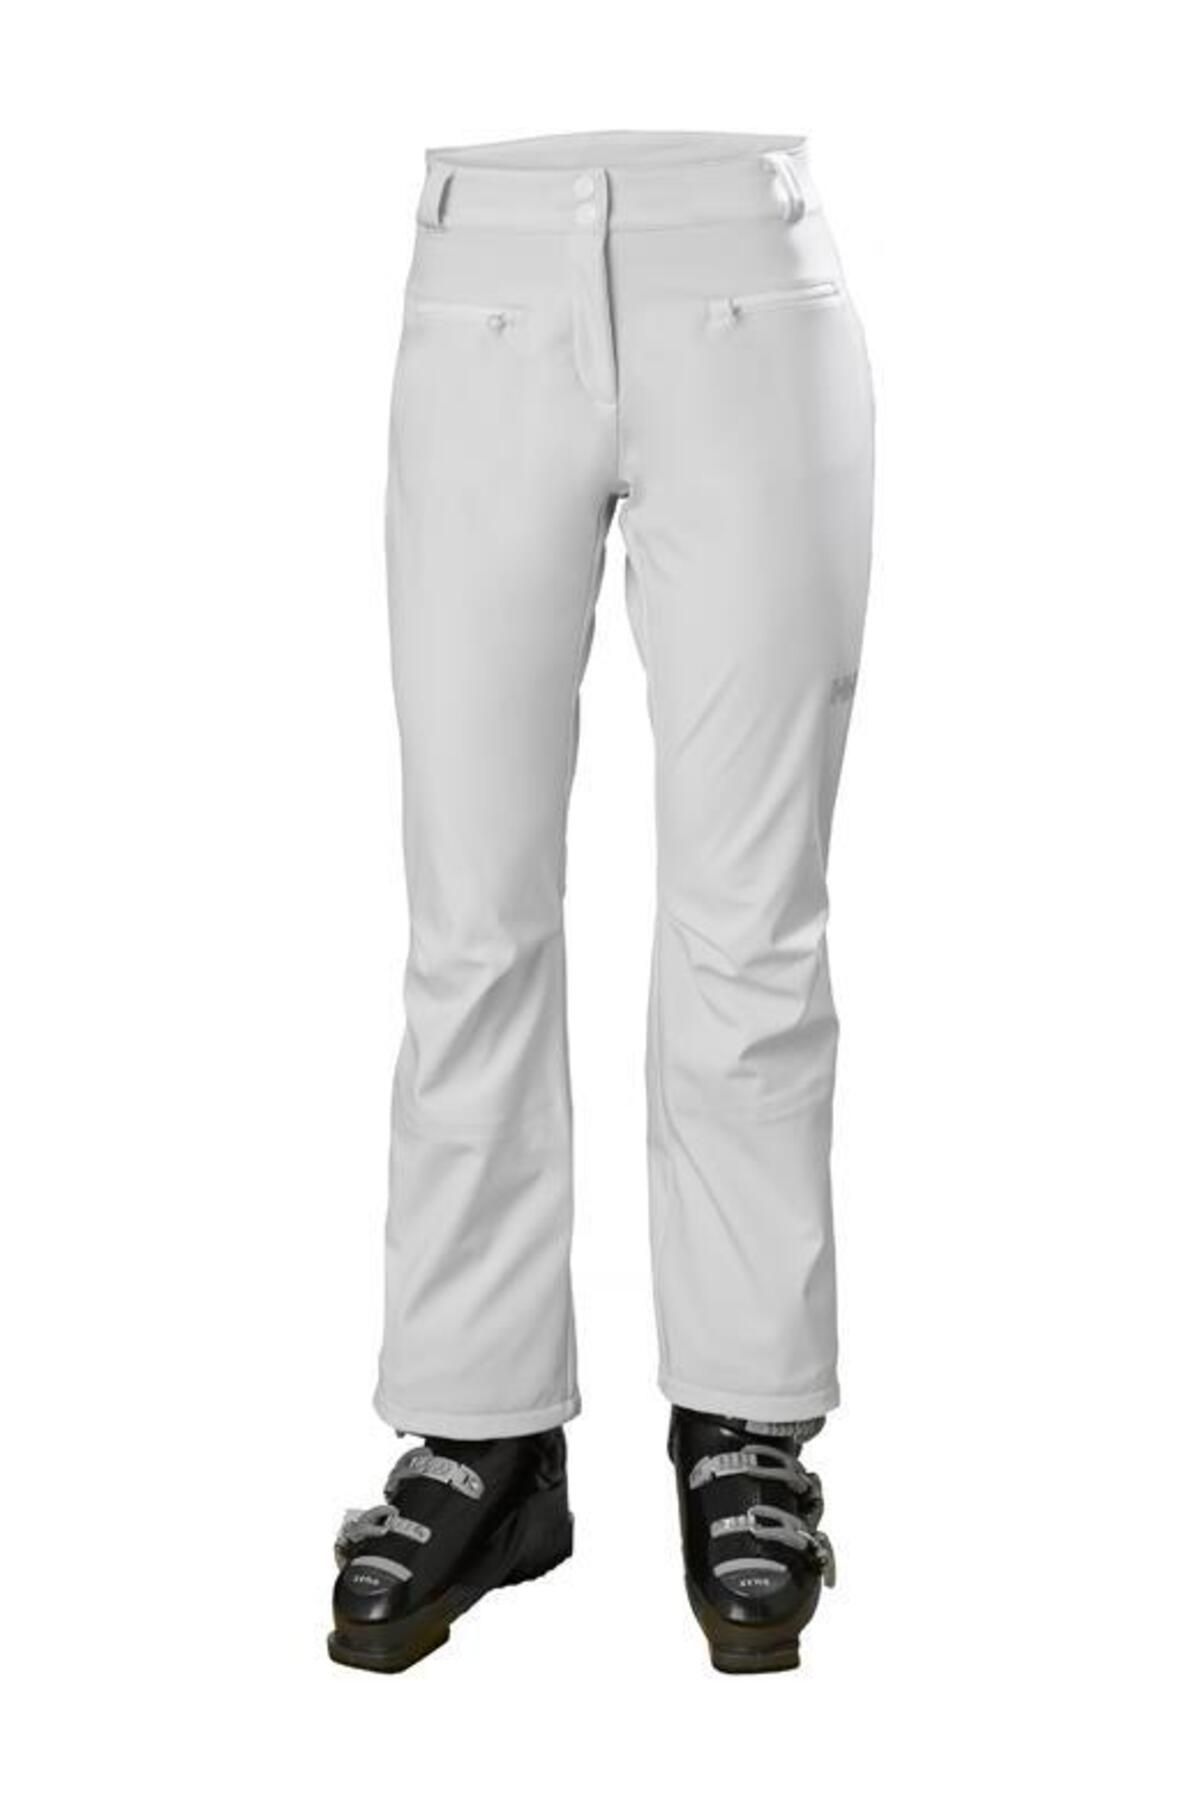 Helly Hansen Hh W Bellissimo 2 Pant